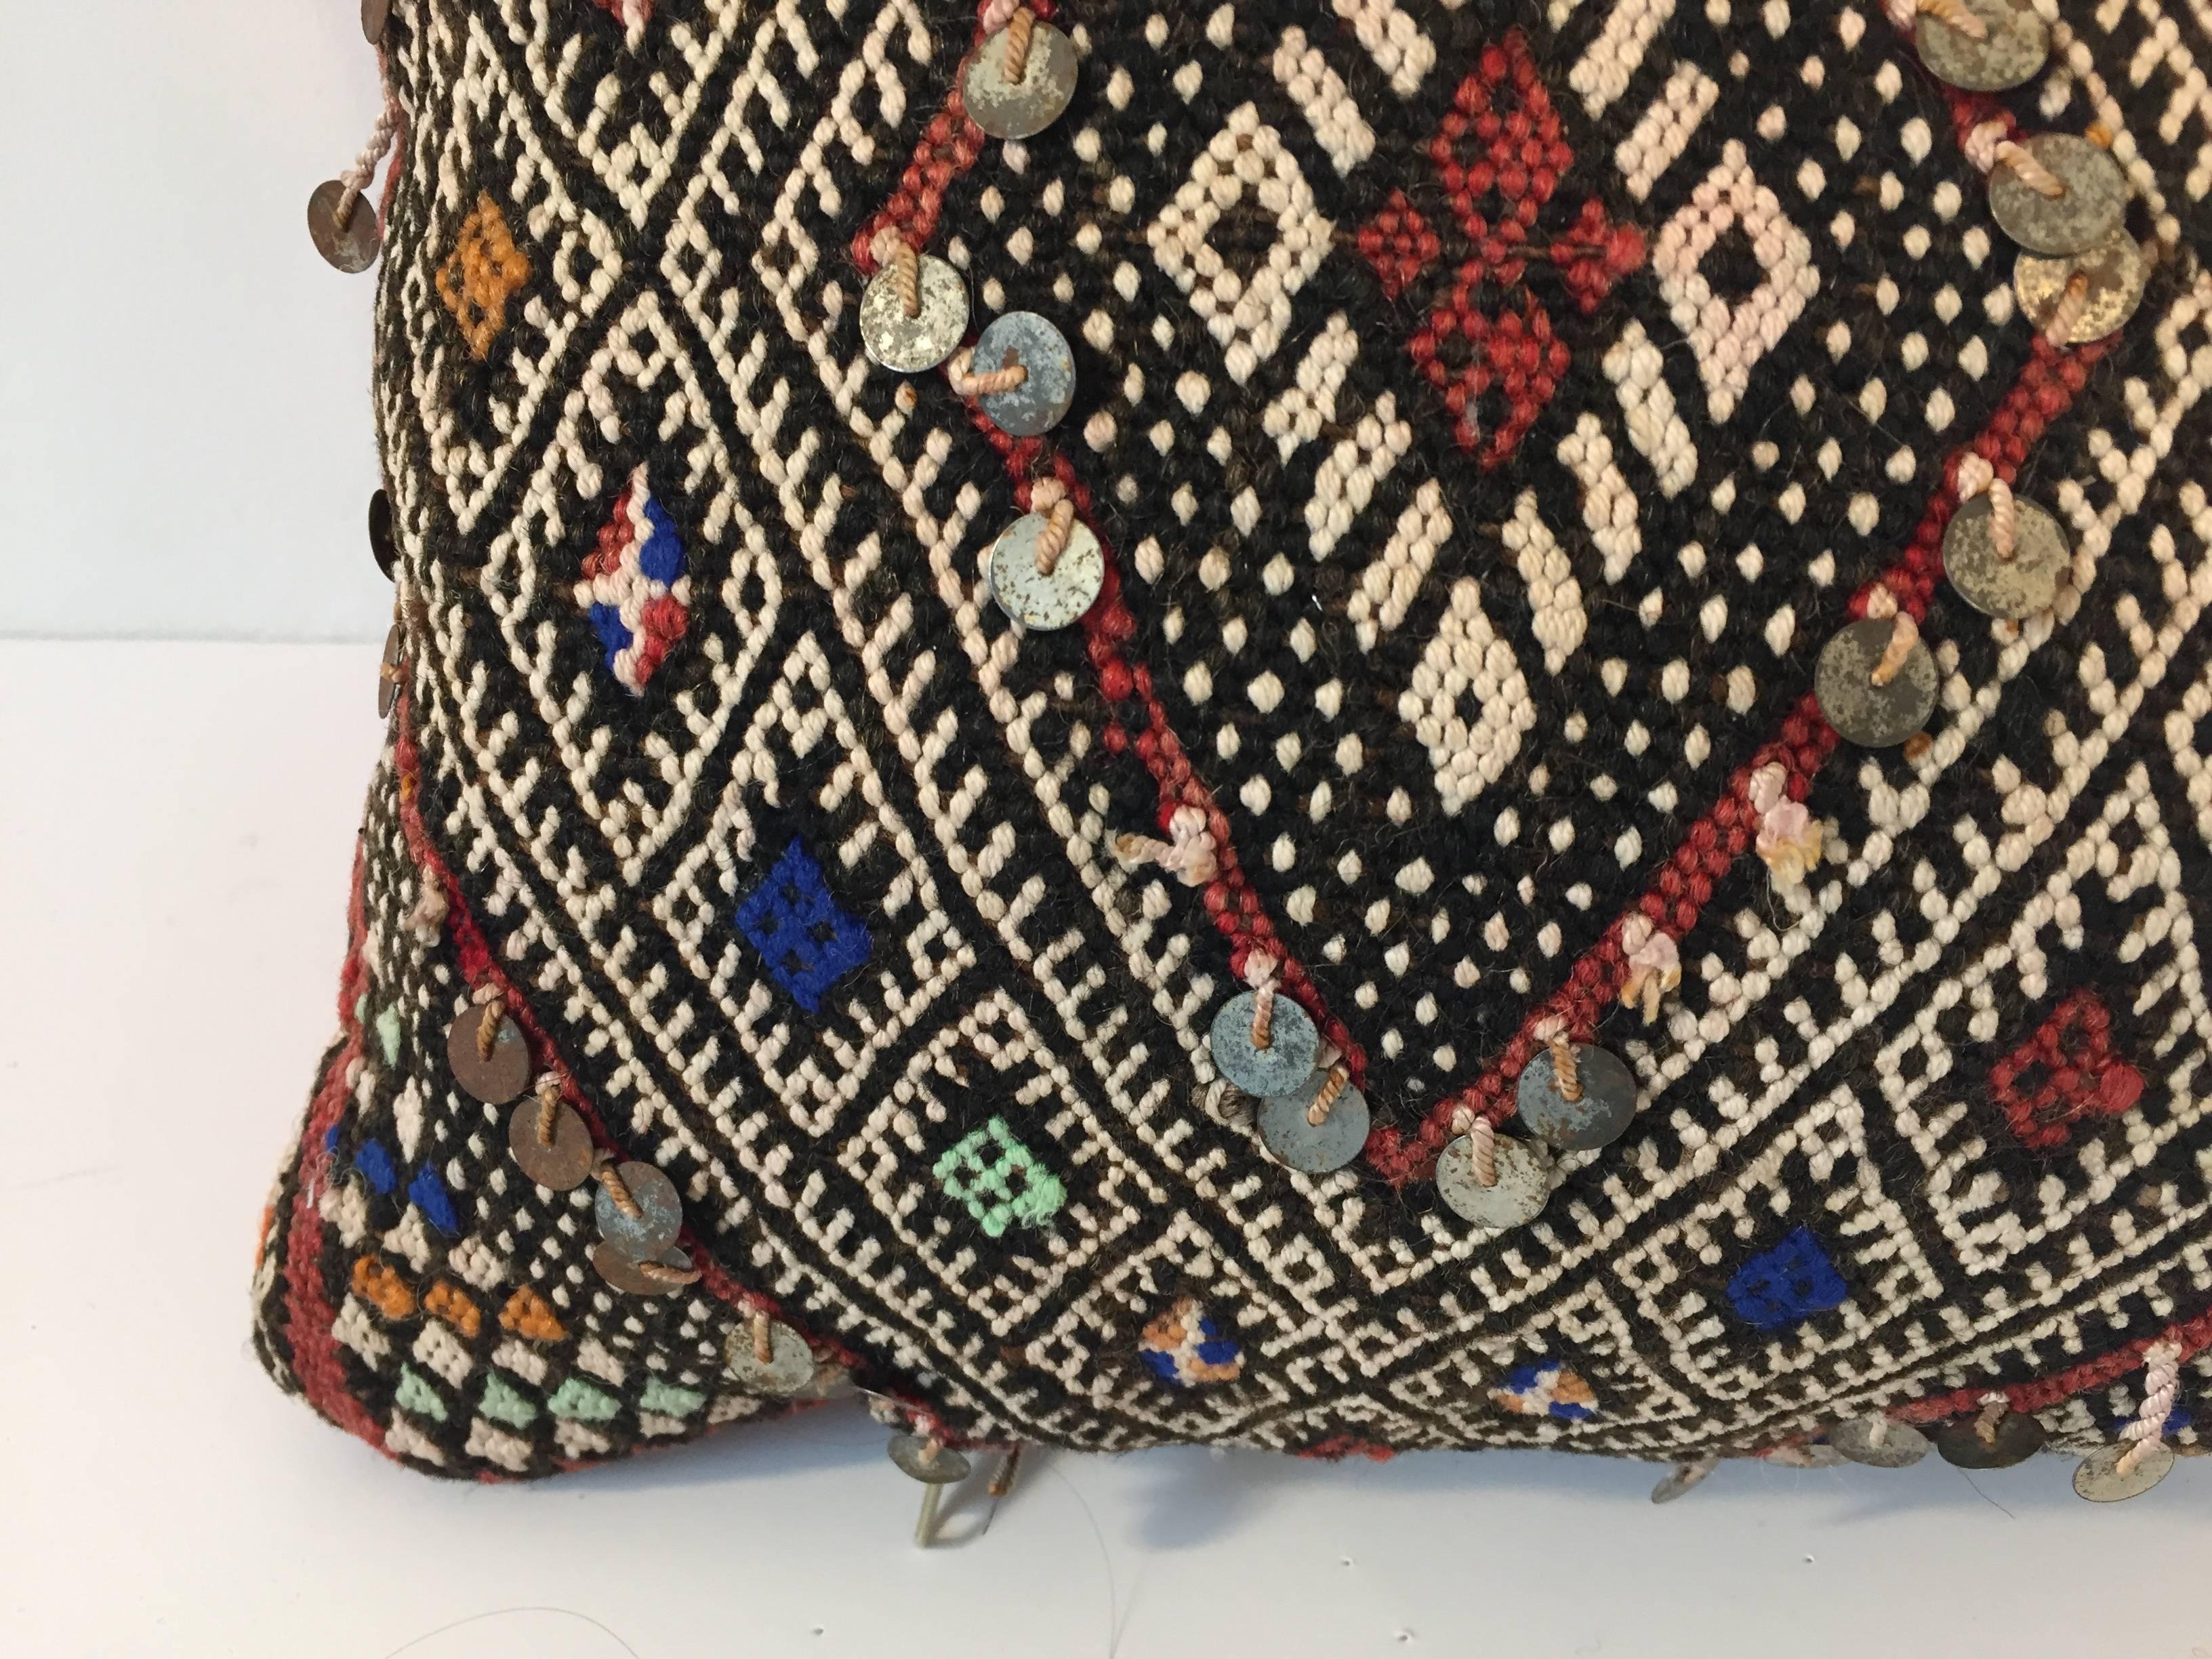 Moroccan Berber pillow red with geometric tribal diamond designs.
Handwoven tribal throw pillow made from a vintage flat-weave rug. 
The front and the back are made from a different rug, front is more elaborate and back is burnt orange.